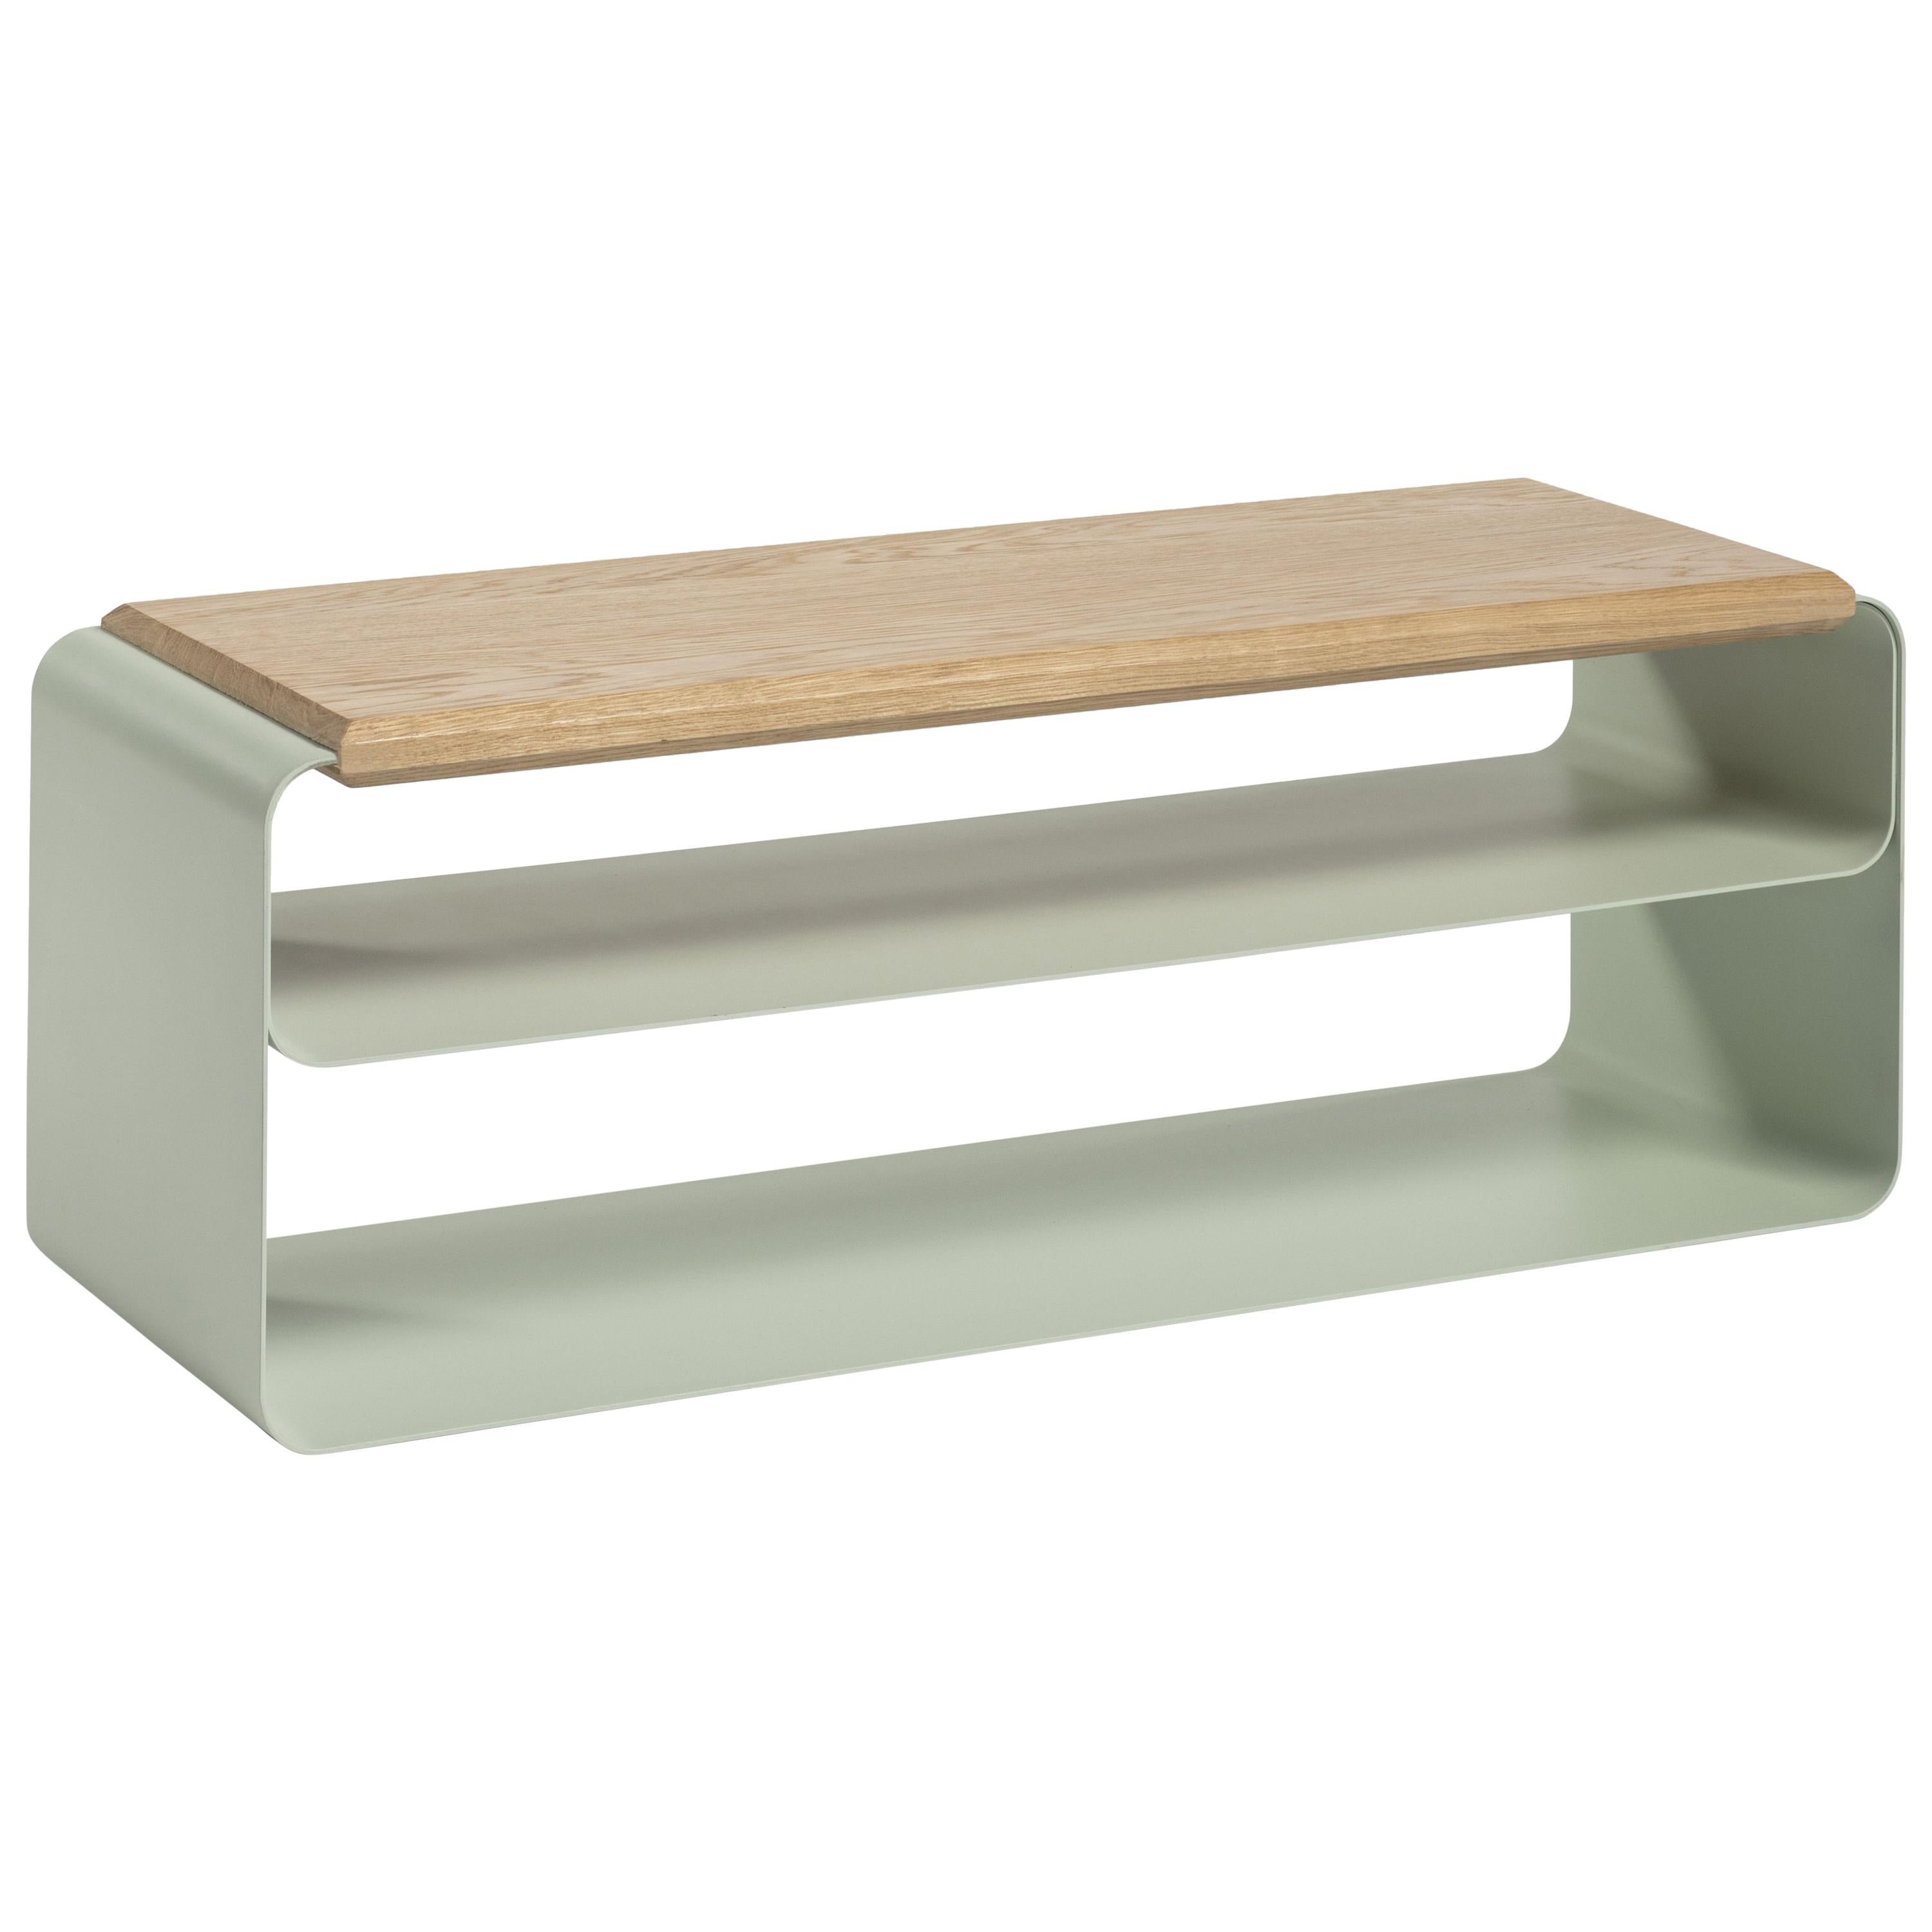 Bench in metal and wood - by Mauro Accardi & Silvia Buccheri for Medulum For Sale